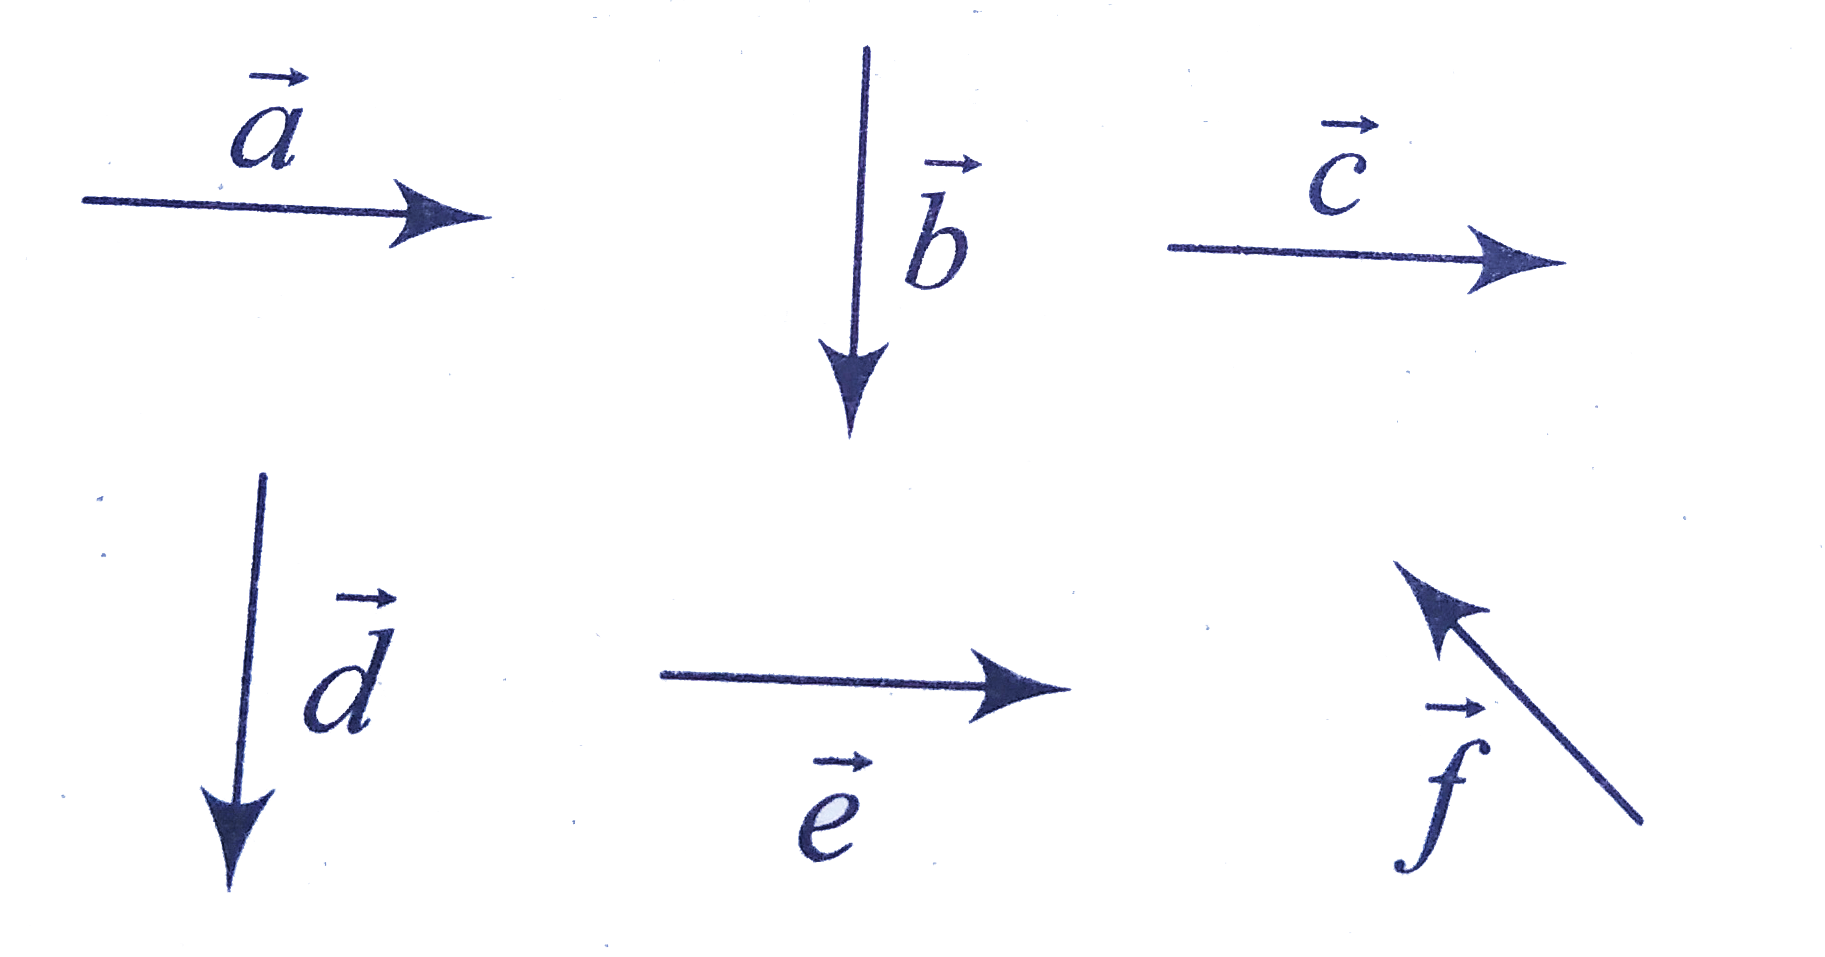 Six vector vec(a) through vec(f) have the magnitudes and direction indicated in the figure. Which of the following statements is true?